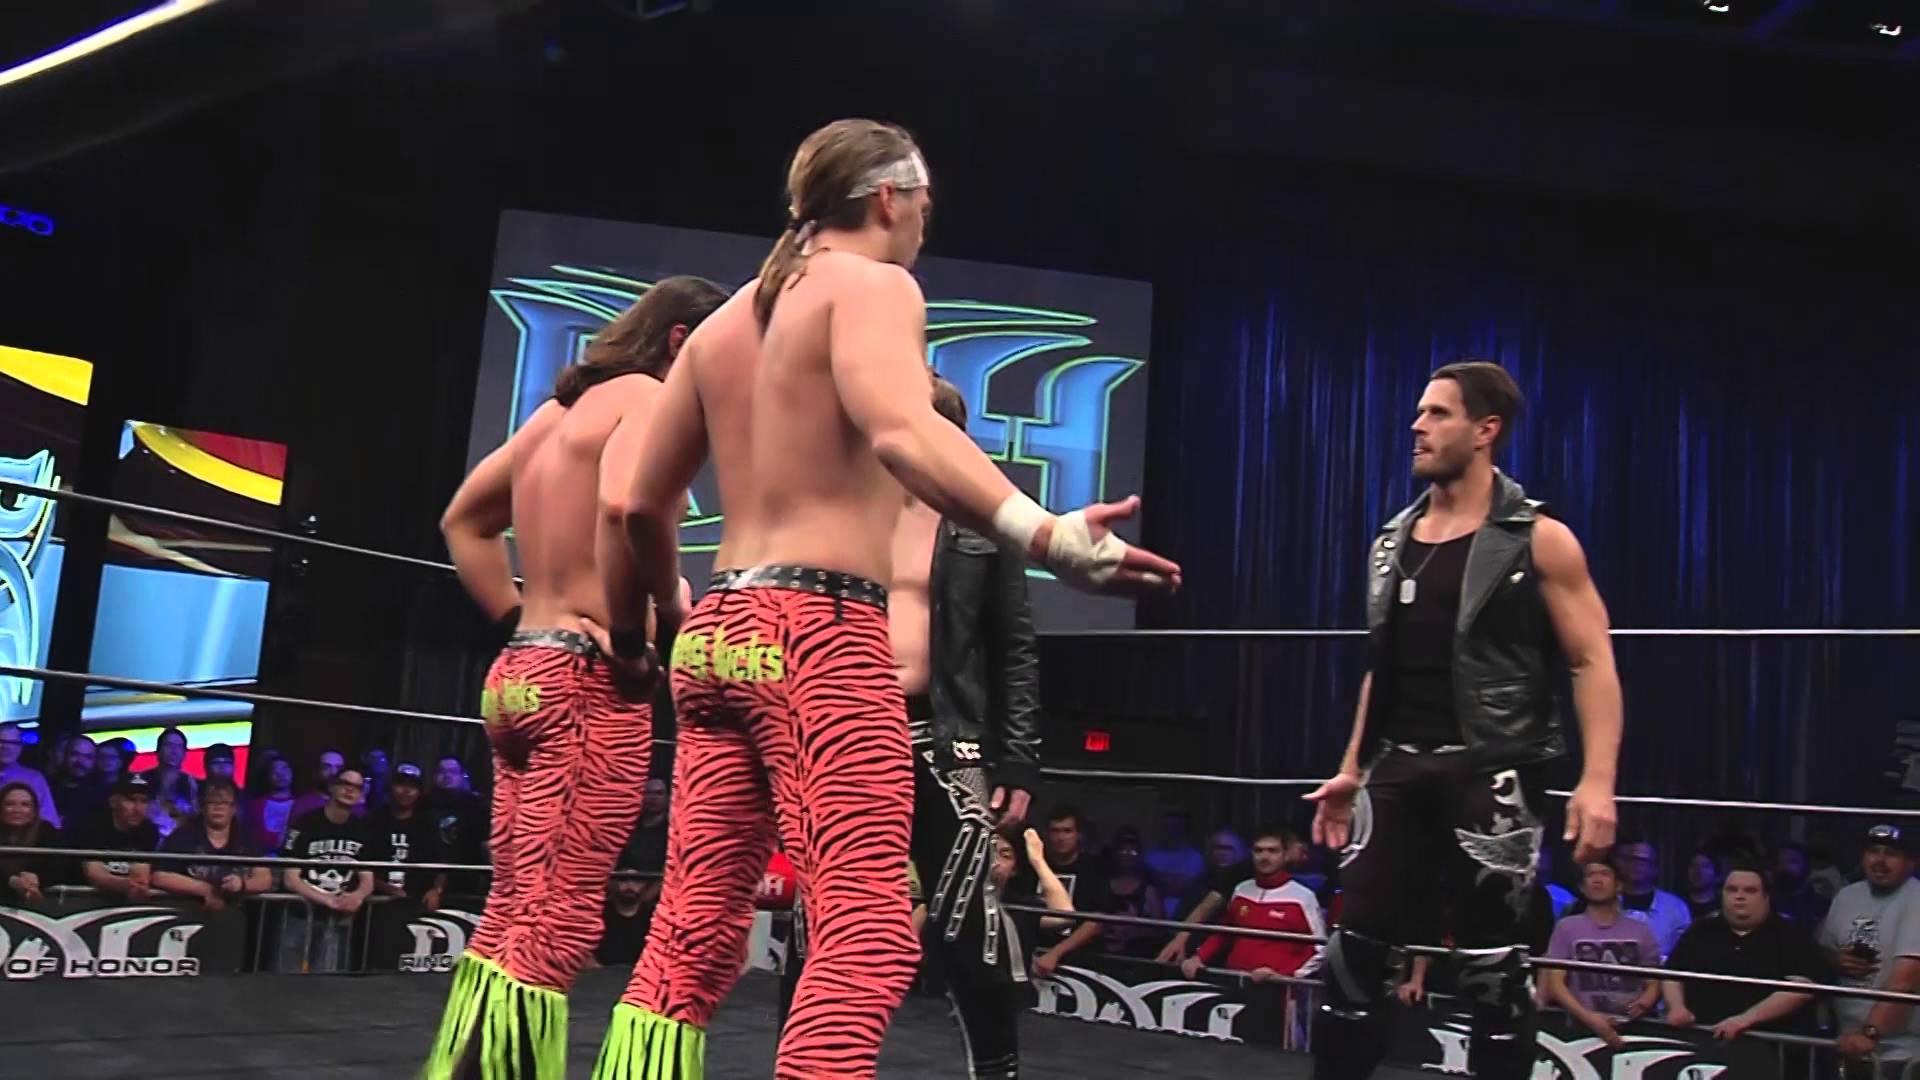 ROH AFTER THE BELL jump the YOUNG BUCKS TV EP